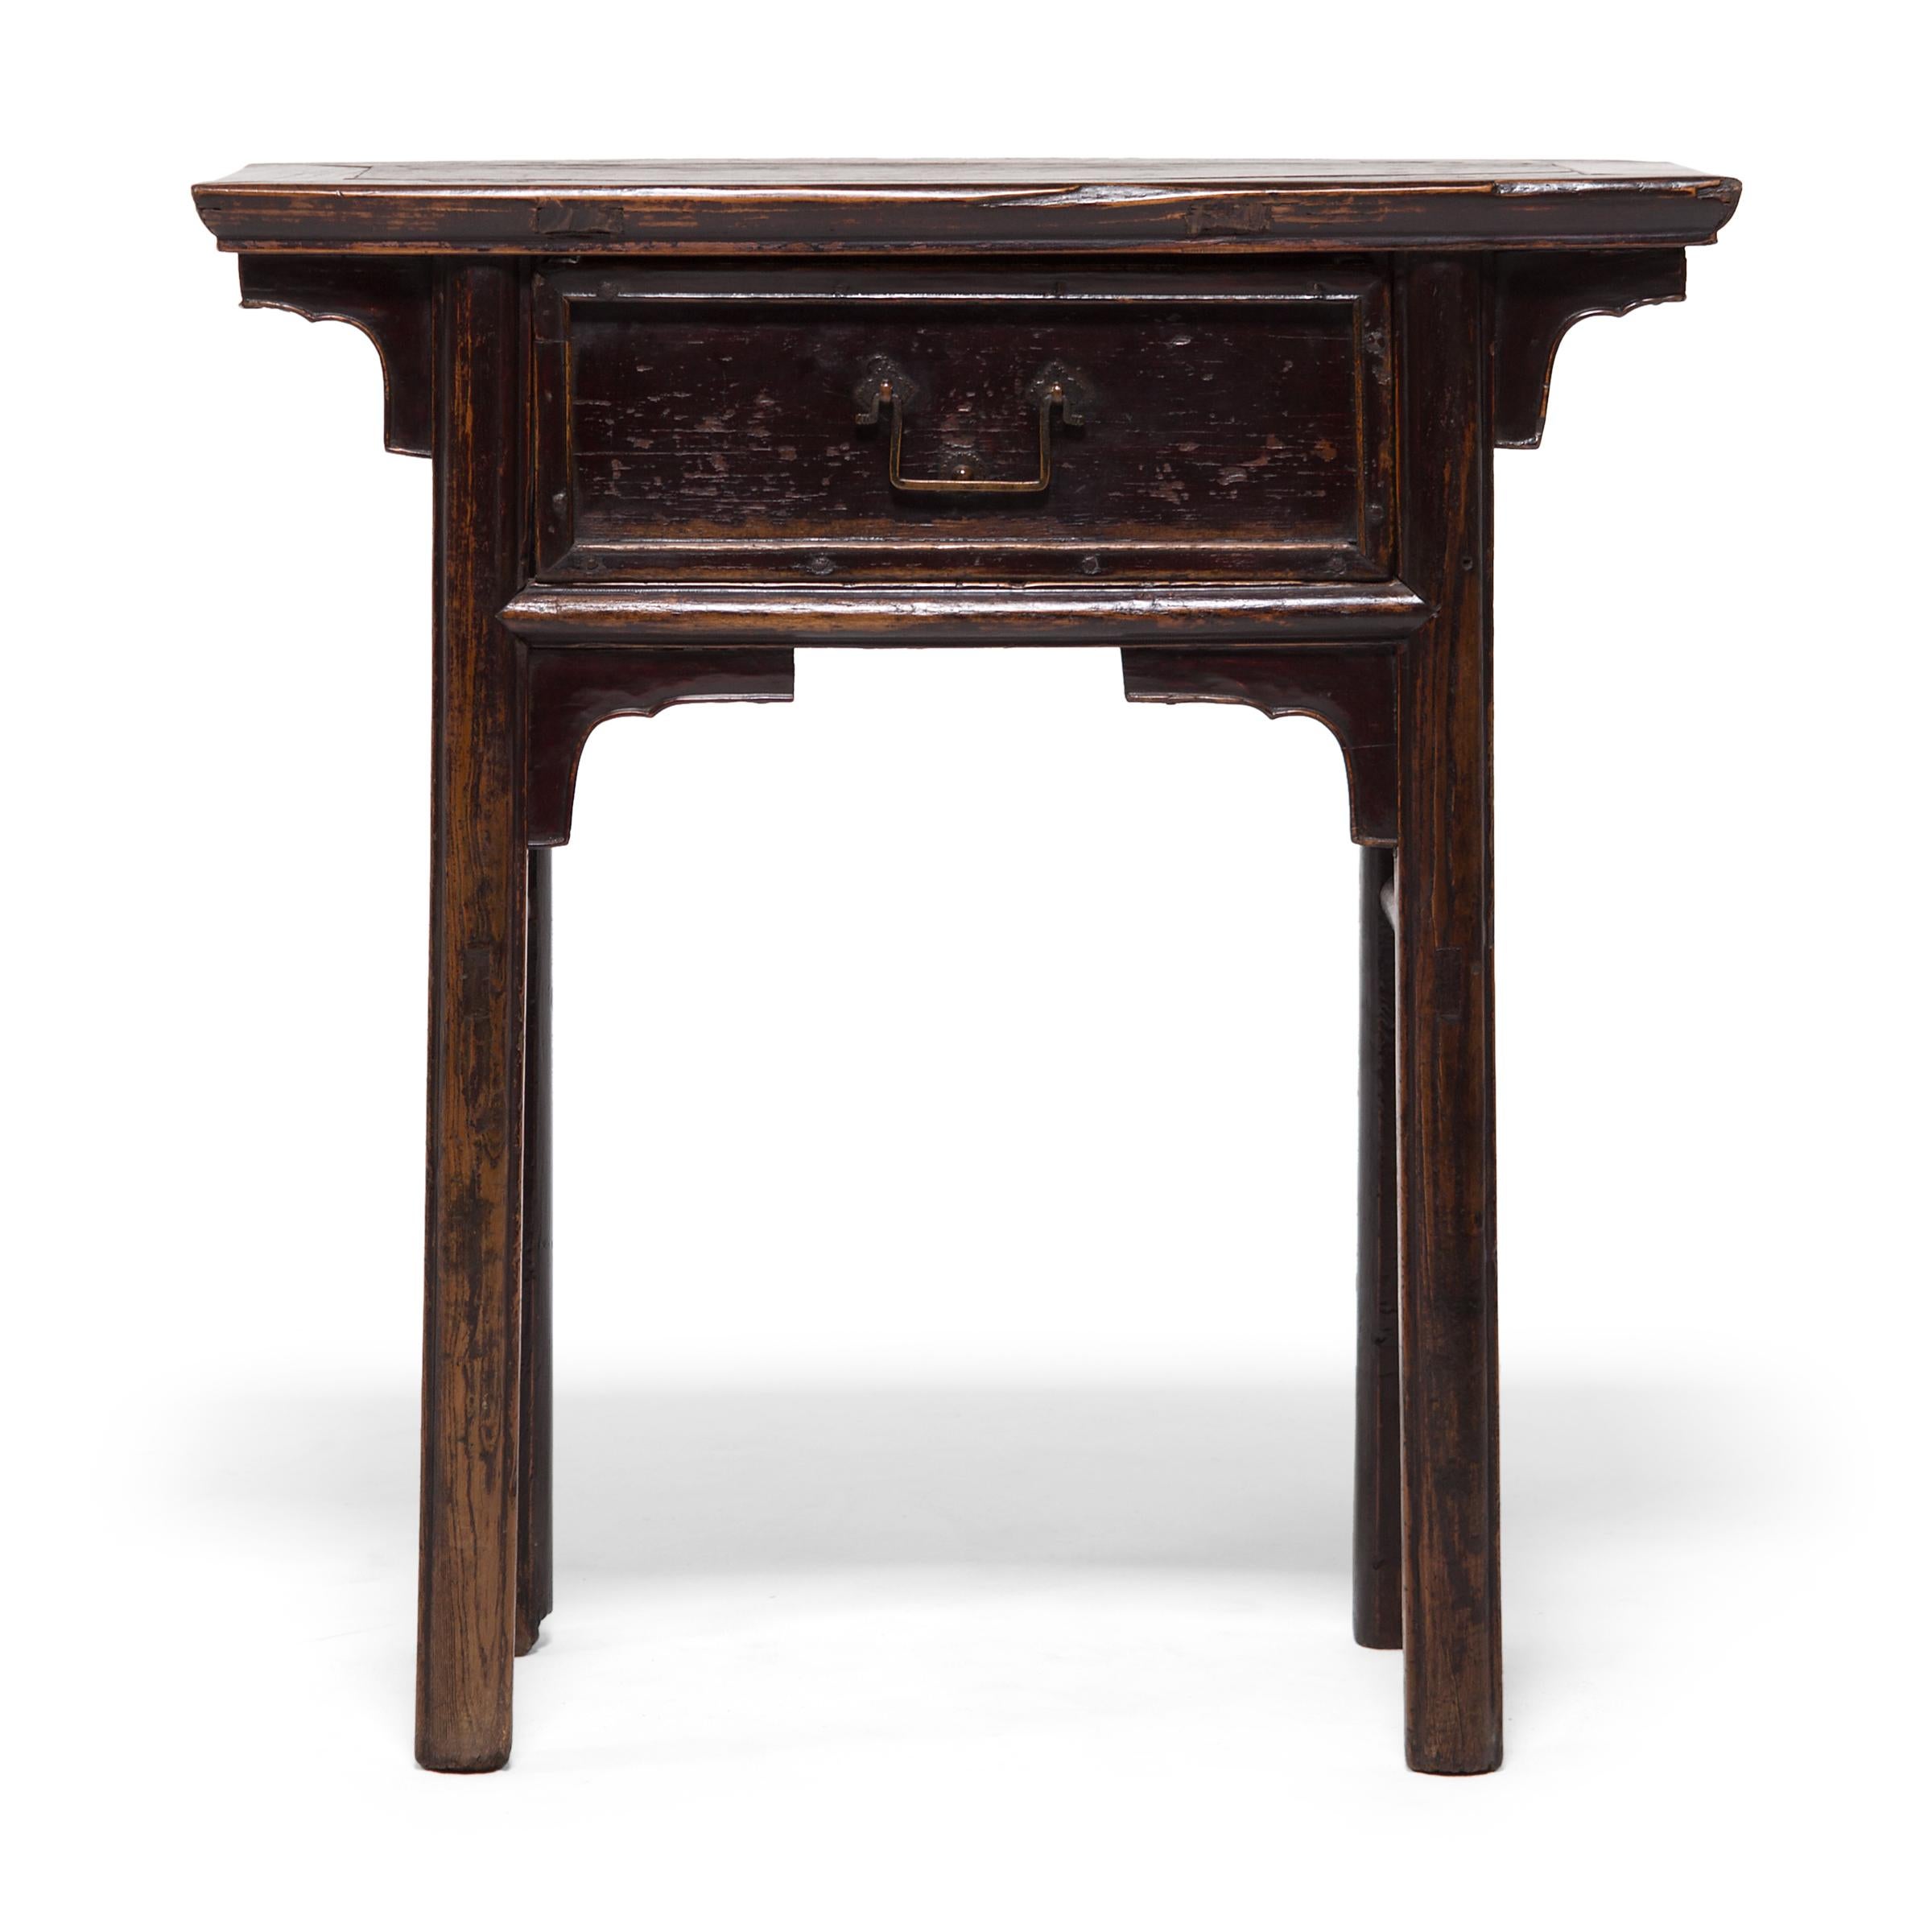 This clean-lined elmwood table from China's Shanxi province was likely used as an altar table in a Qing-dynasty home. Designed to display incense and offerings, the narrow table has a single drawer intended for storing incense and other accessories.